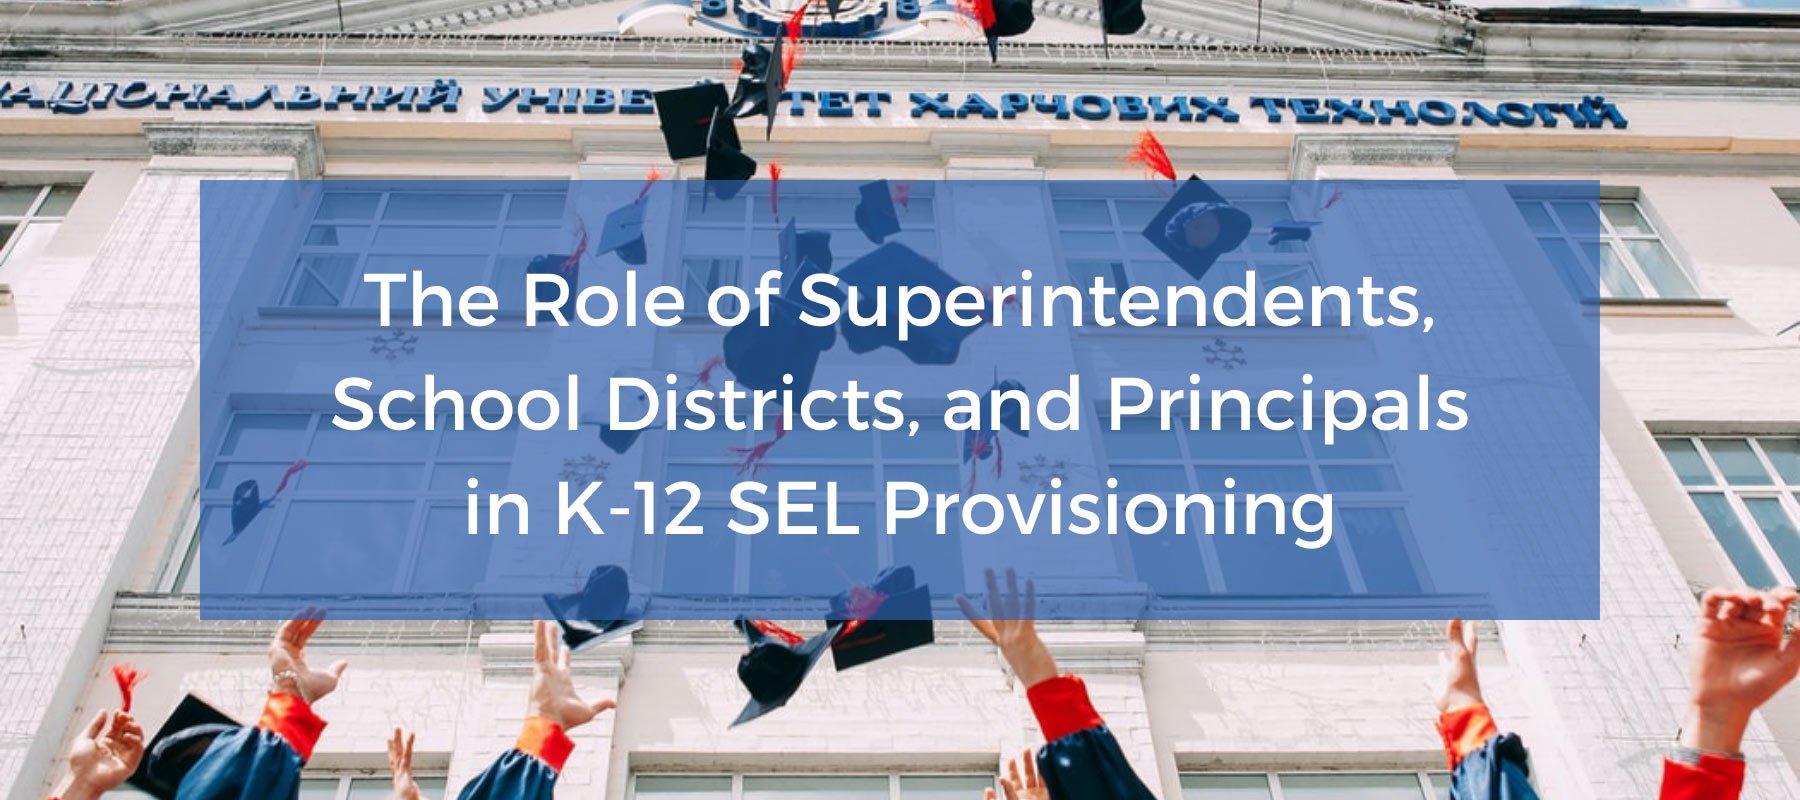 The Role of Superintendents School Districts and Principals in K-12 SEL Provisioning